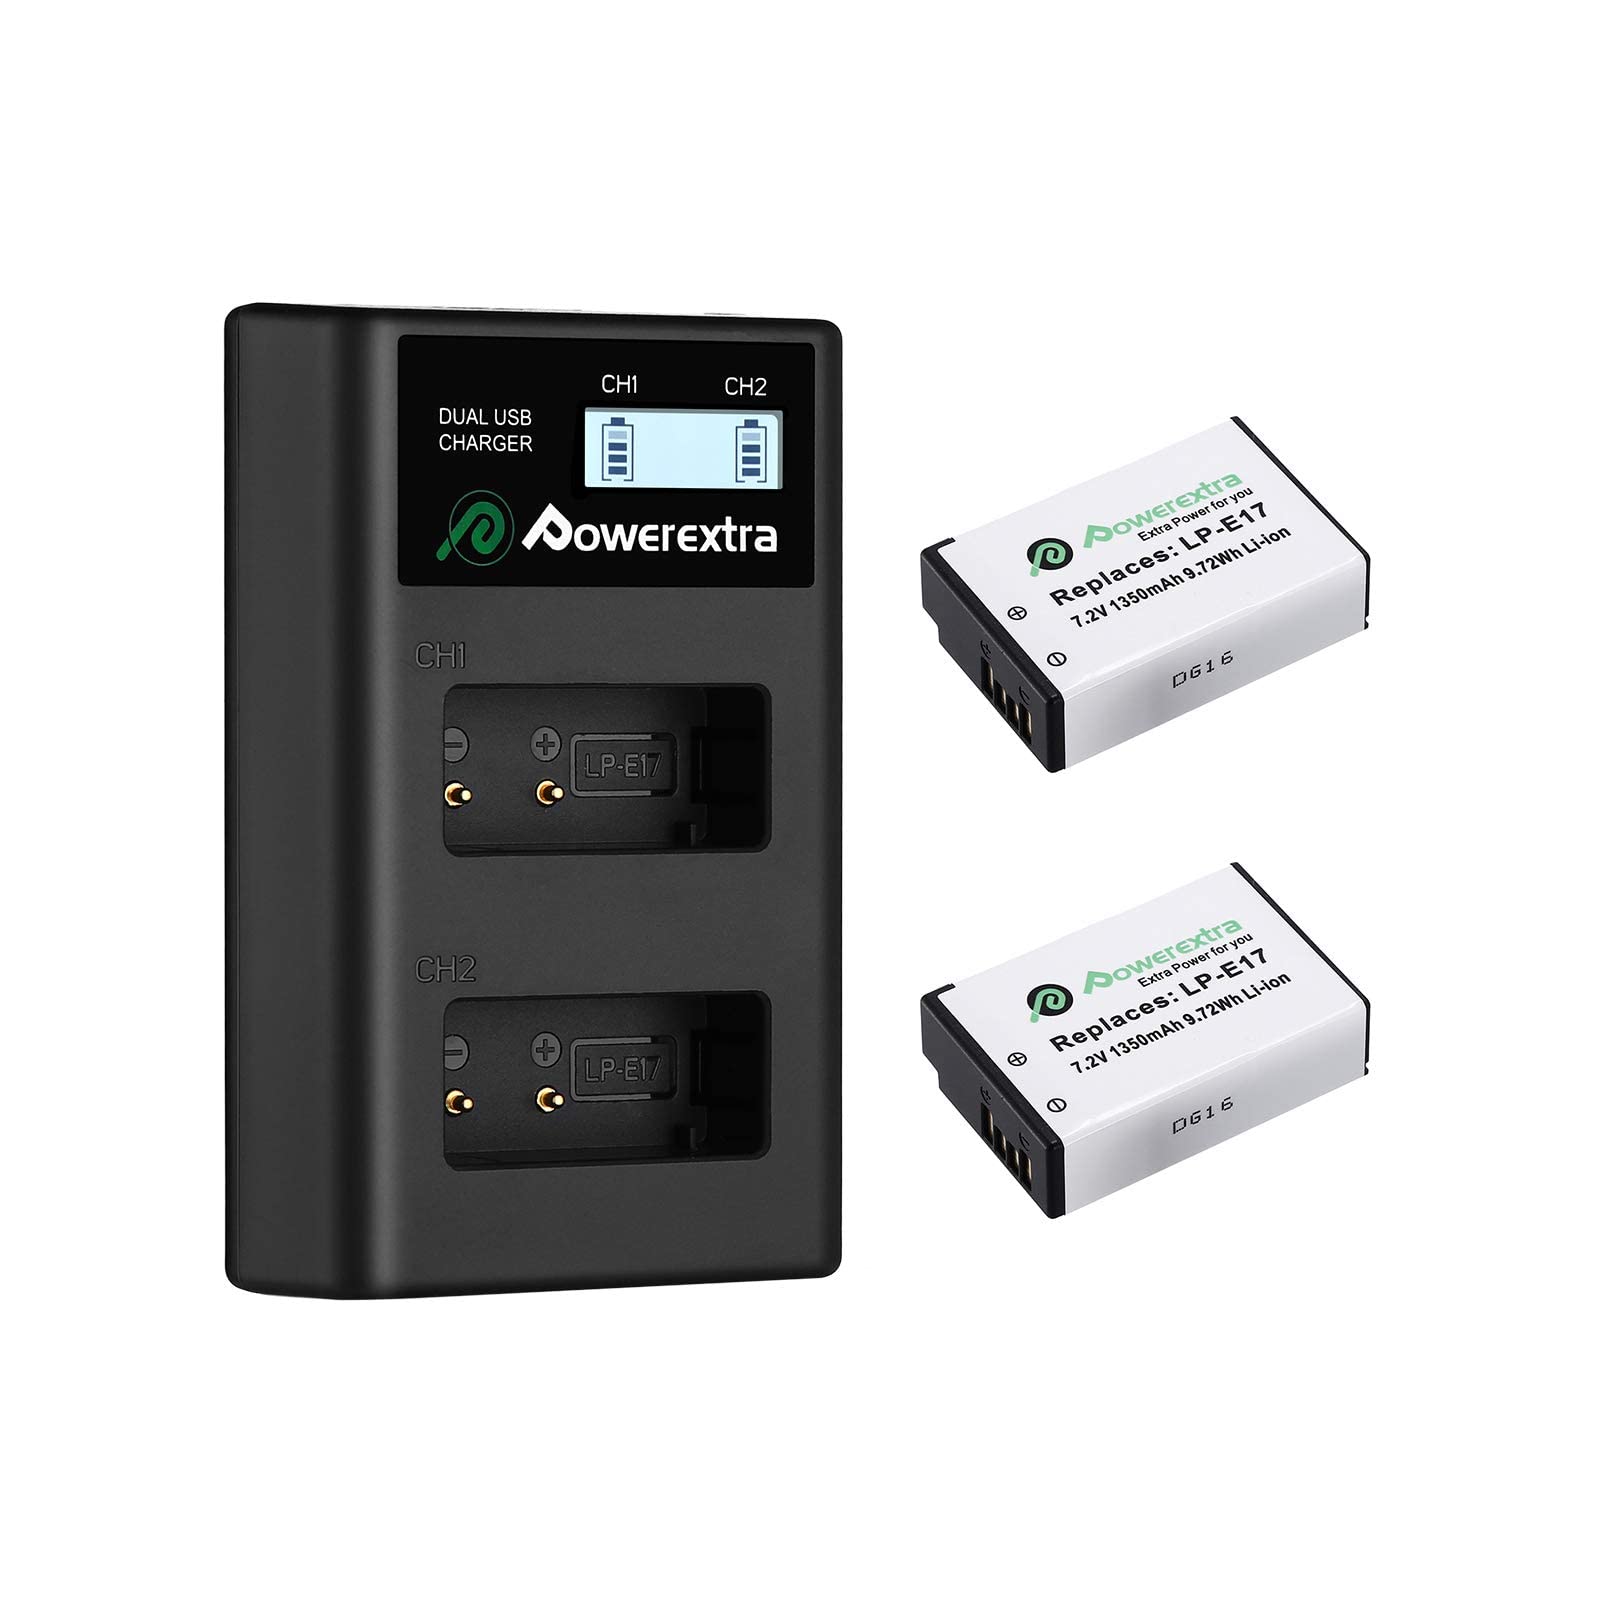 Powerextra LP E17 Batteries Replacement and USB Battery Charger for Canon Cameras